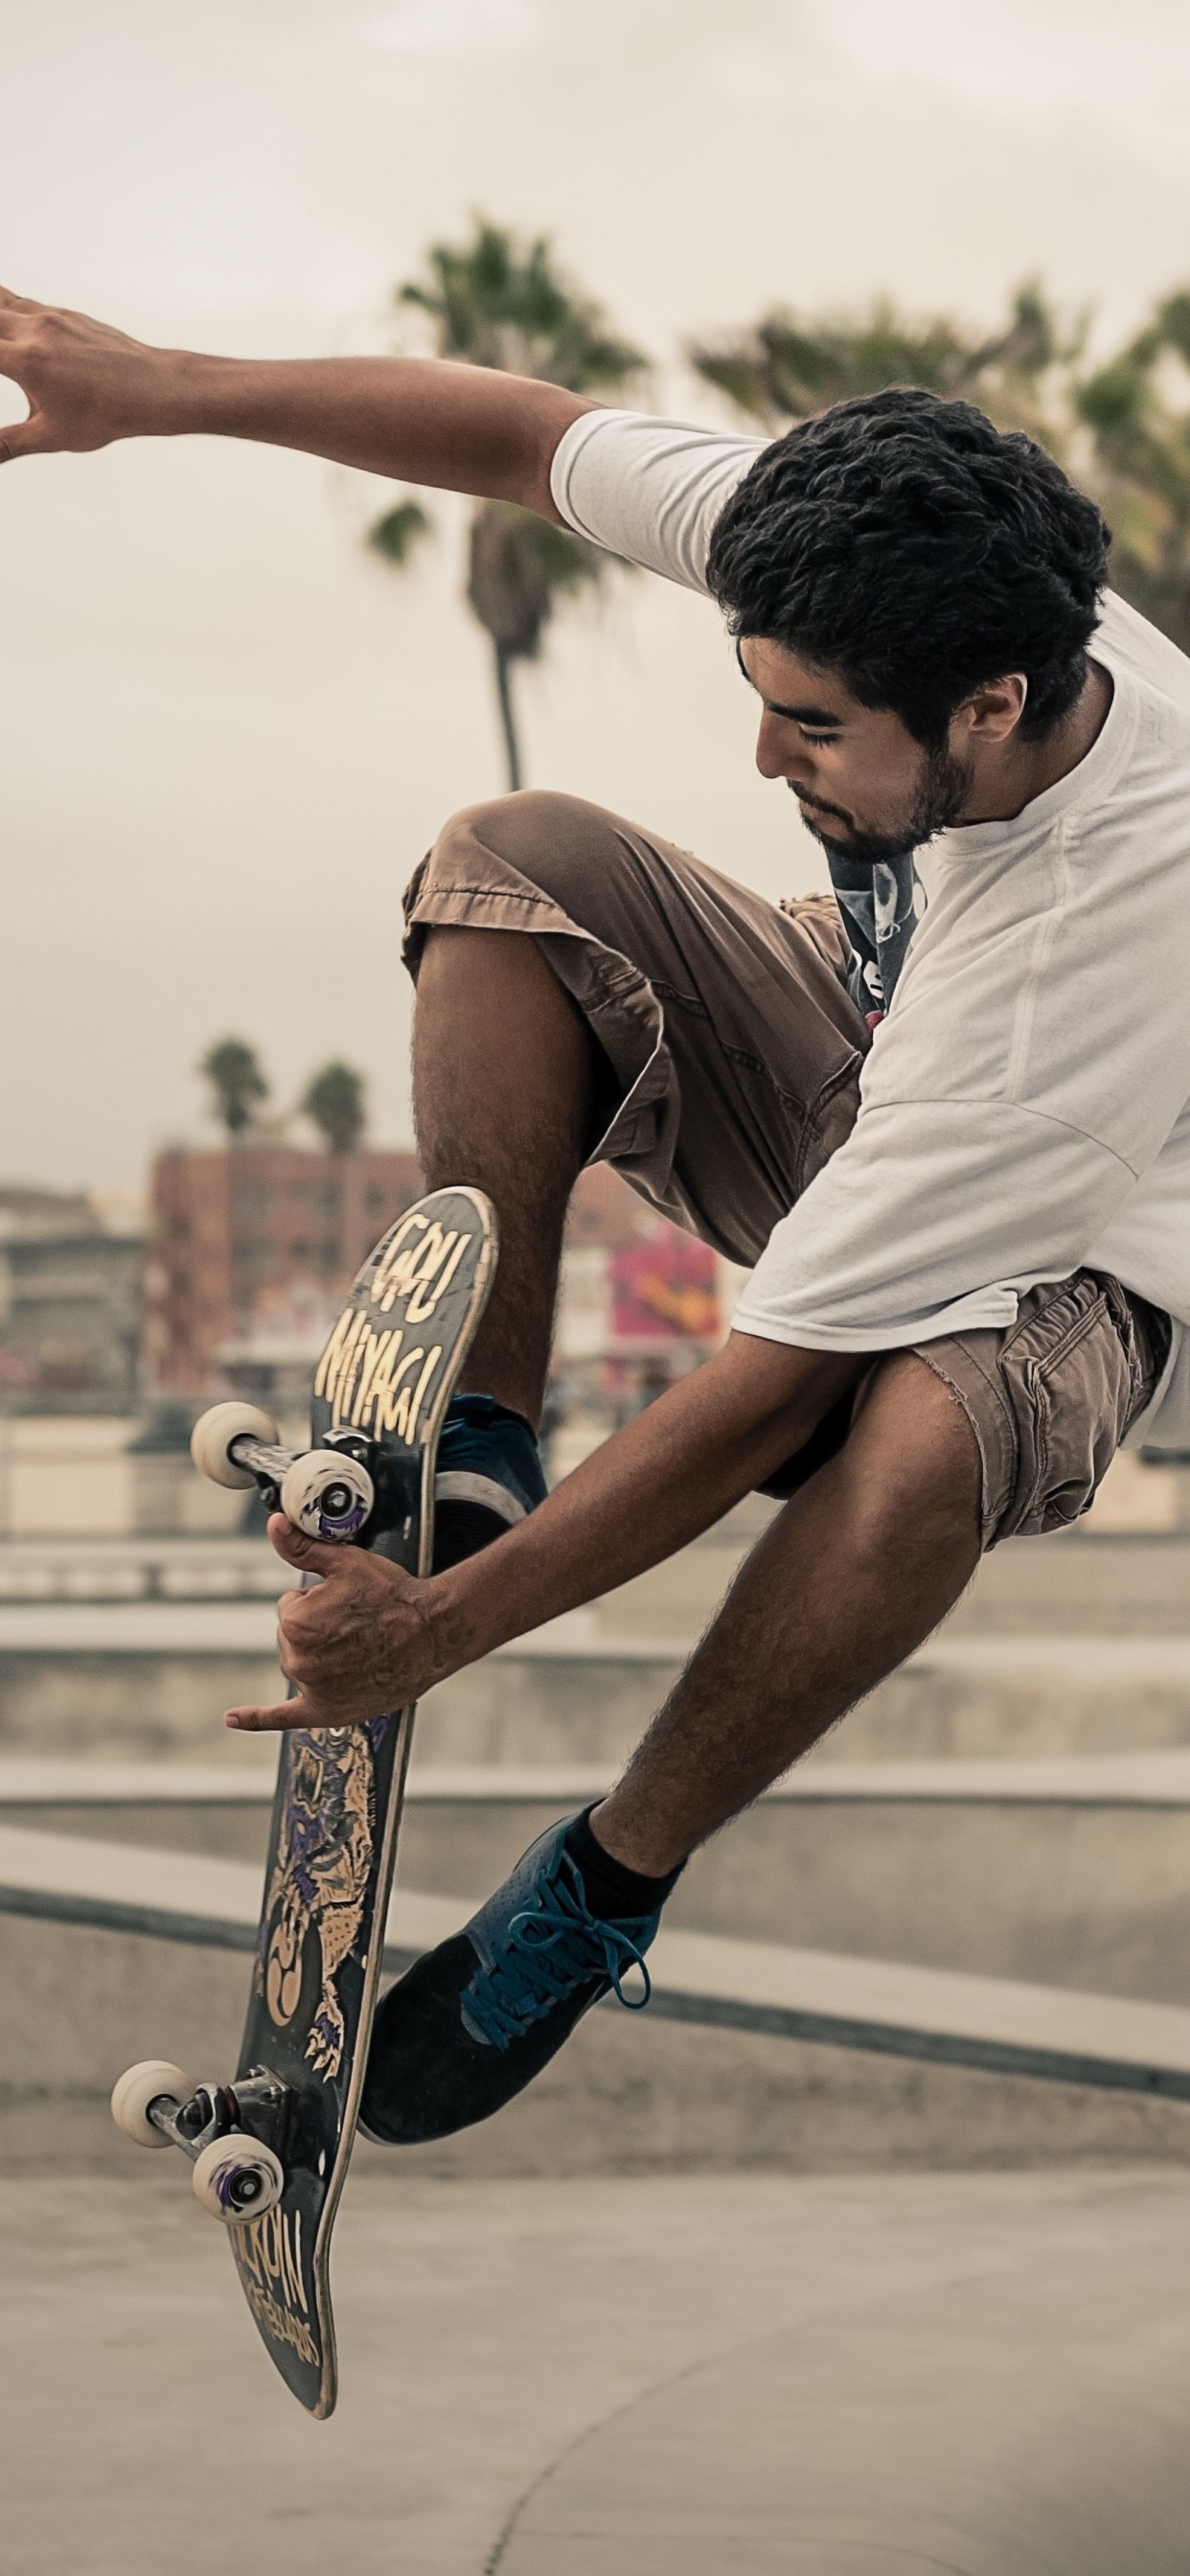 Man in White T-shirt and Brown Shorts Playing Skateboard During Daytime. Wallpaper in 1242x2688 Resolution